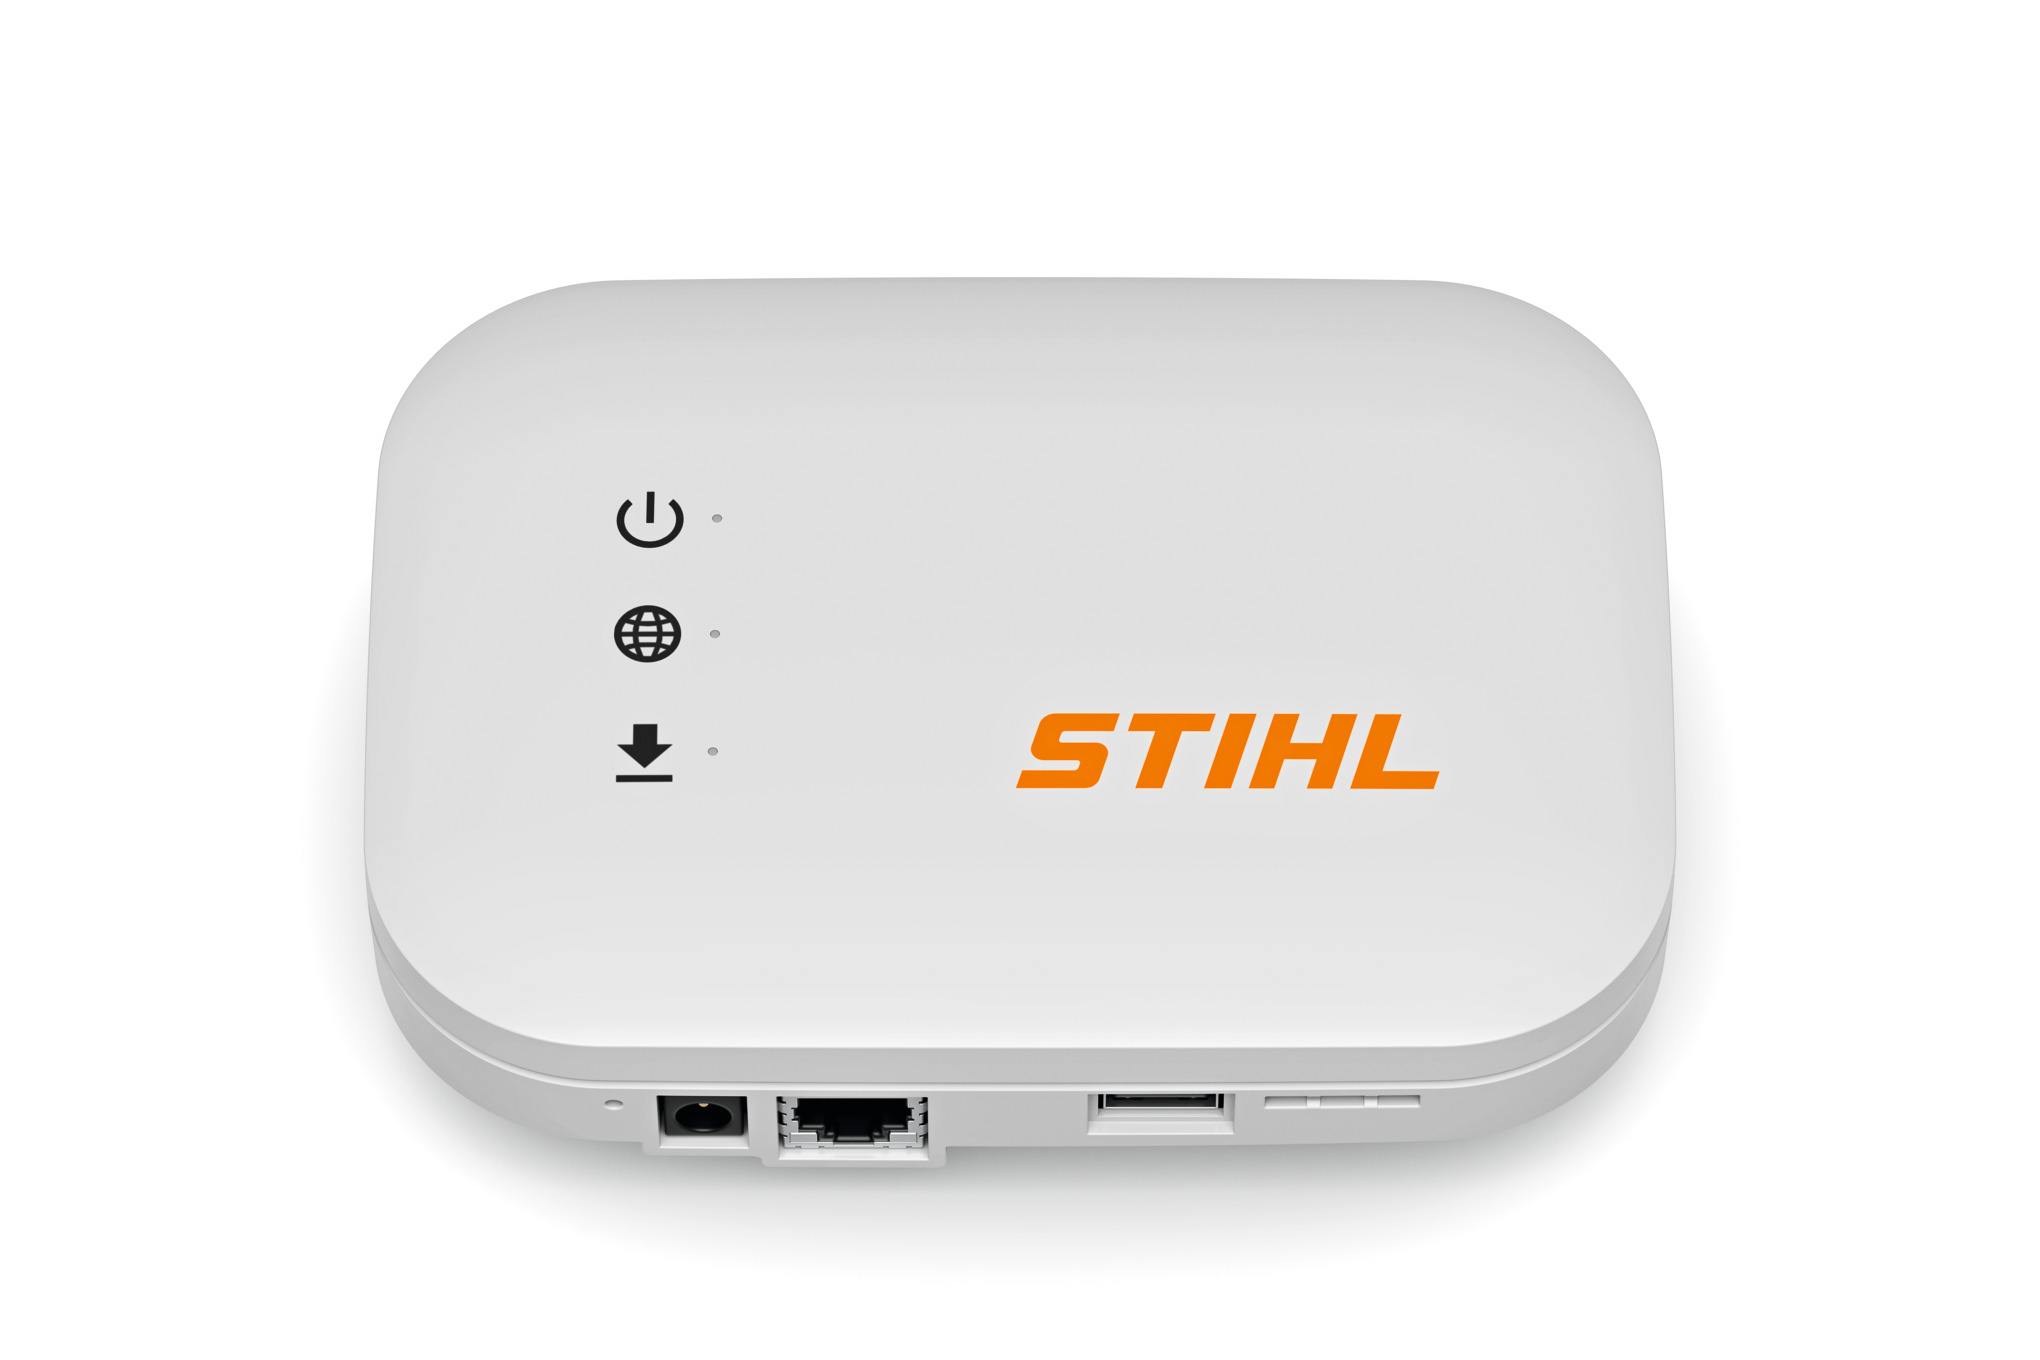 STIHL connected mobile box